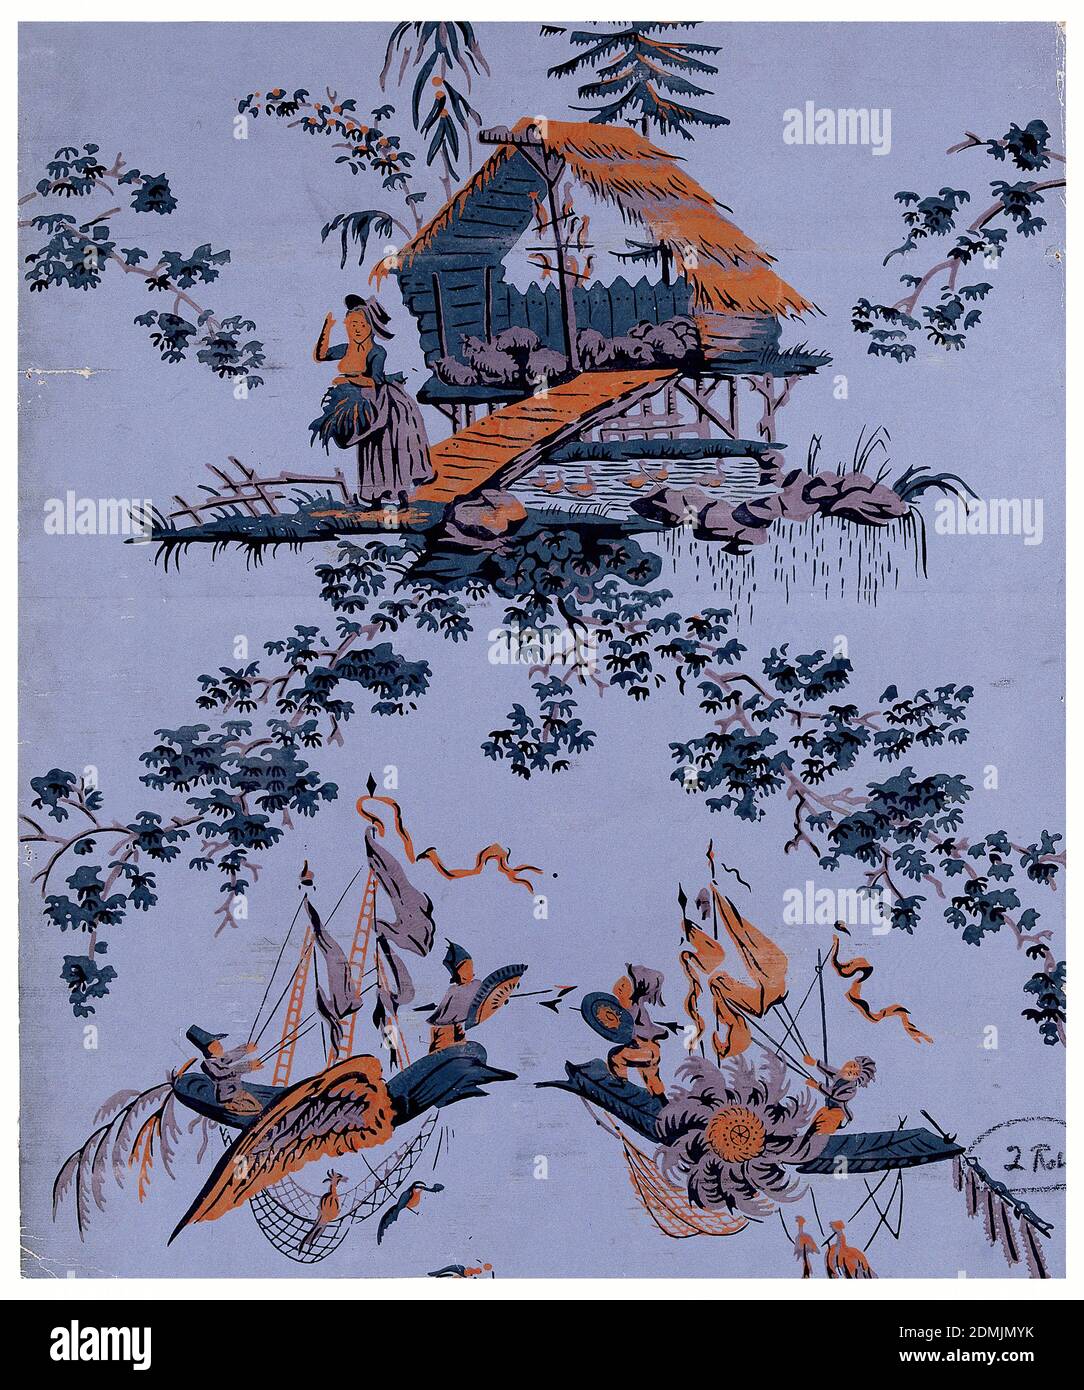 Sidewall, Block printed on handmade paper, Chinoiserie depicting shepherdess guarding her flock, alternating with a pair of boats involved in aerial combat., Paris, France, ca. 1785, Wallcoverings, Sidewall Stock Photo